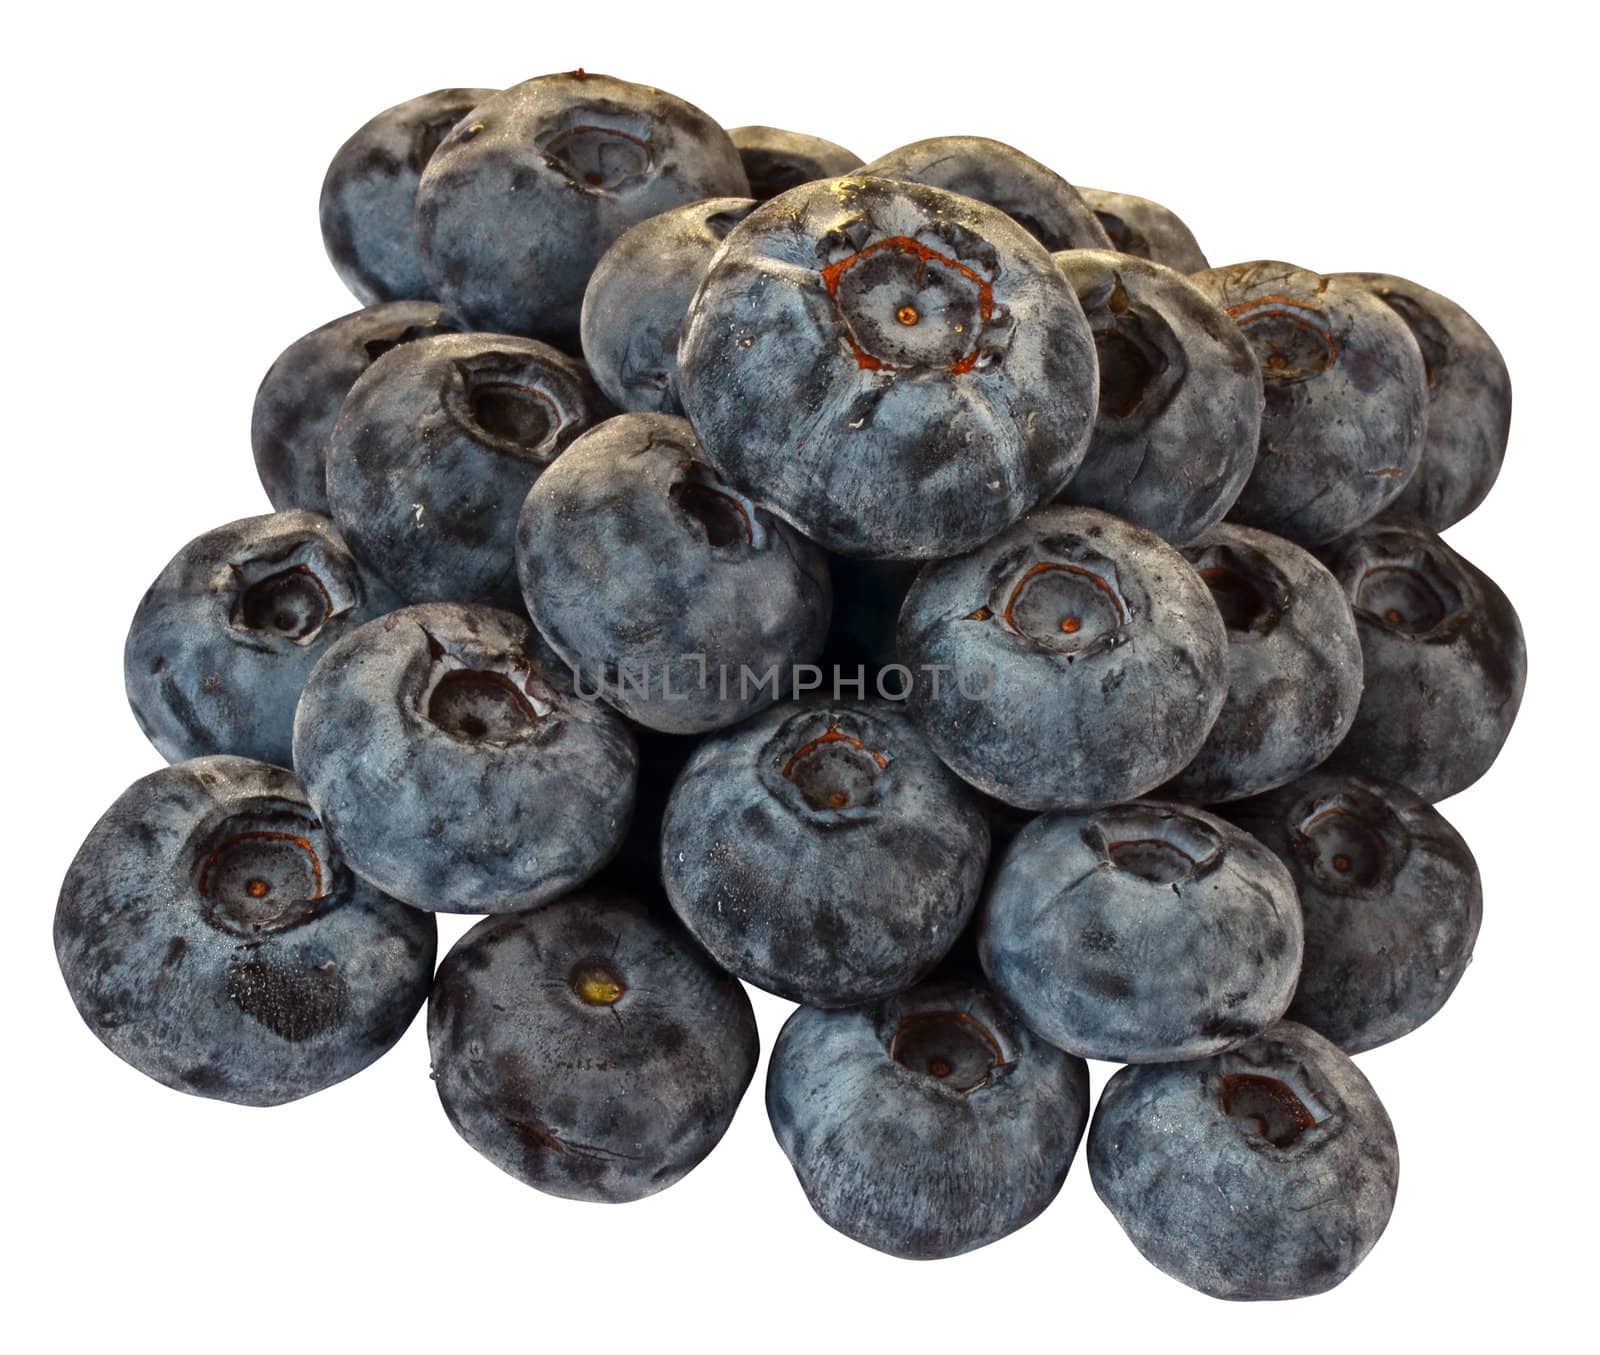 Stack group of huckleberry fruits. Isolated on white background with path.